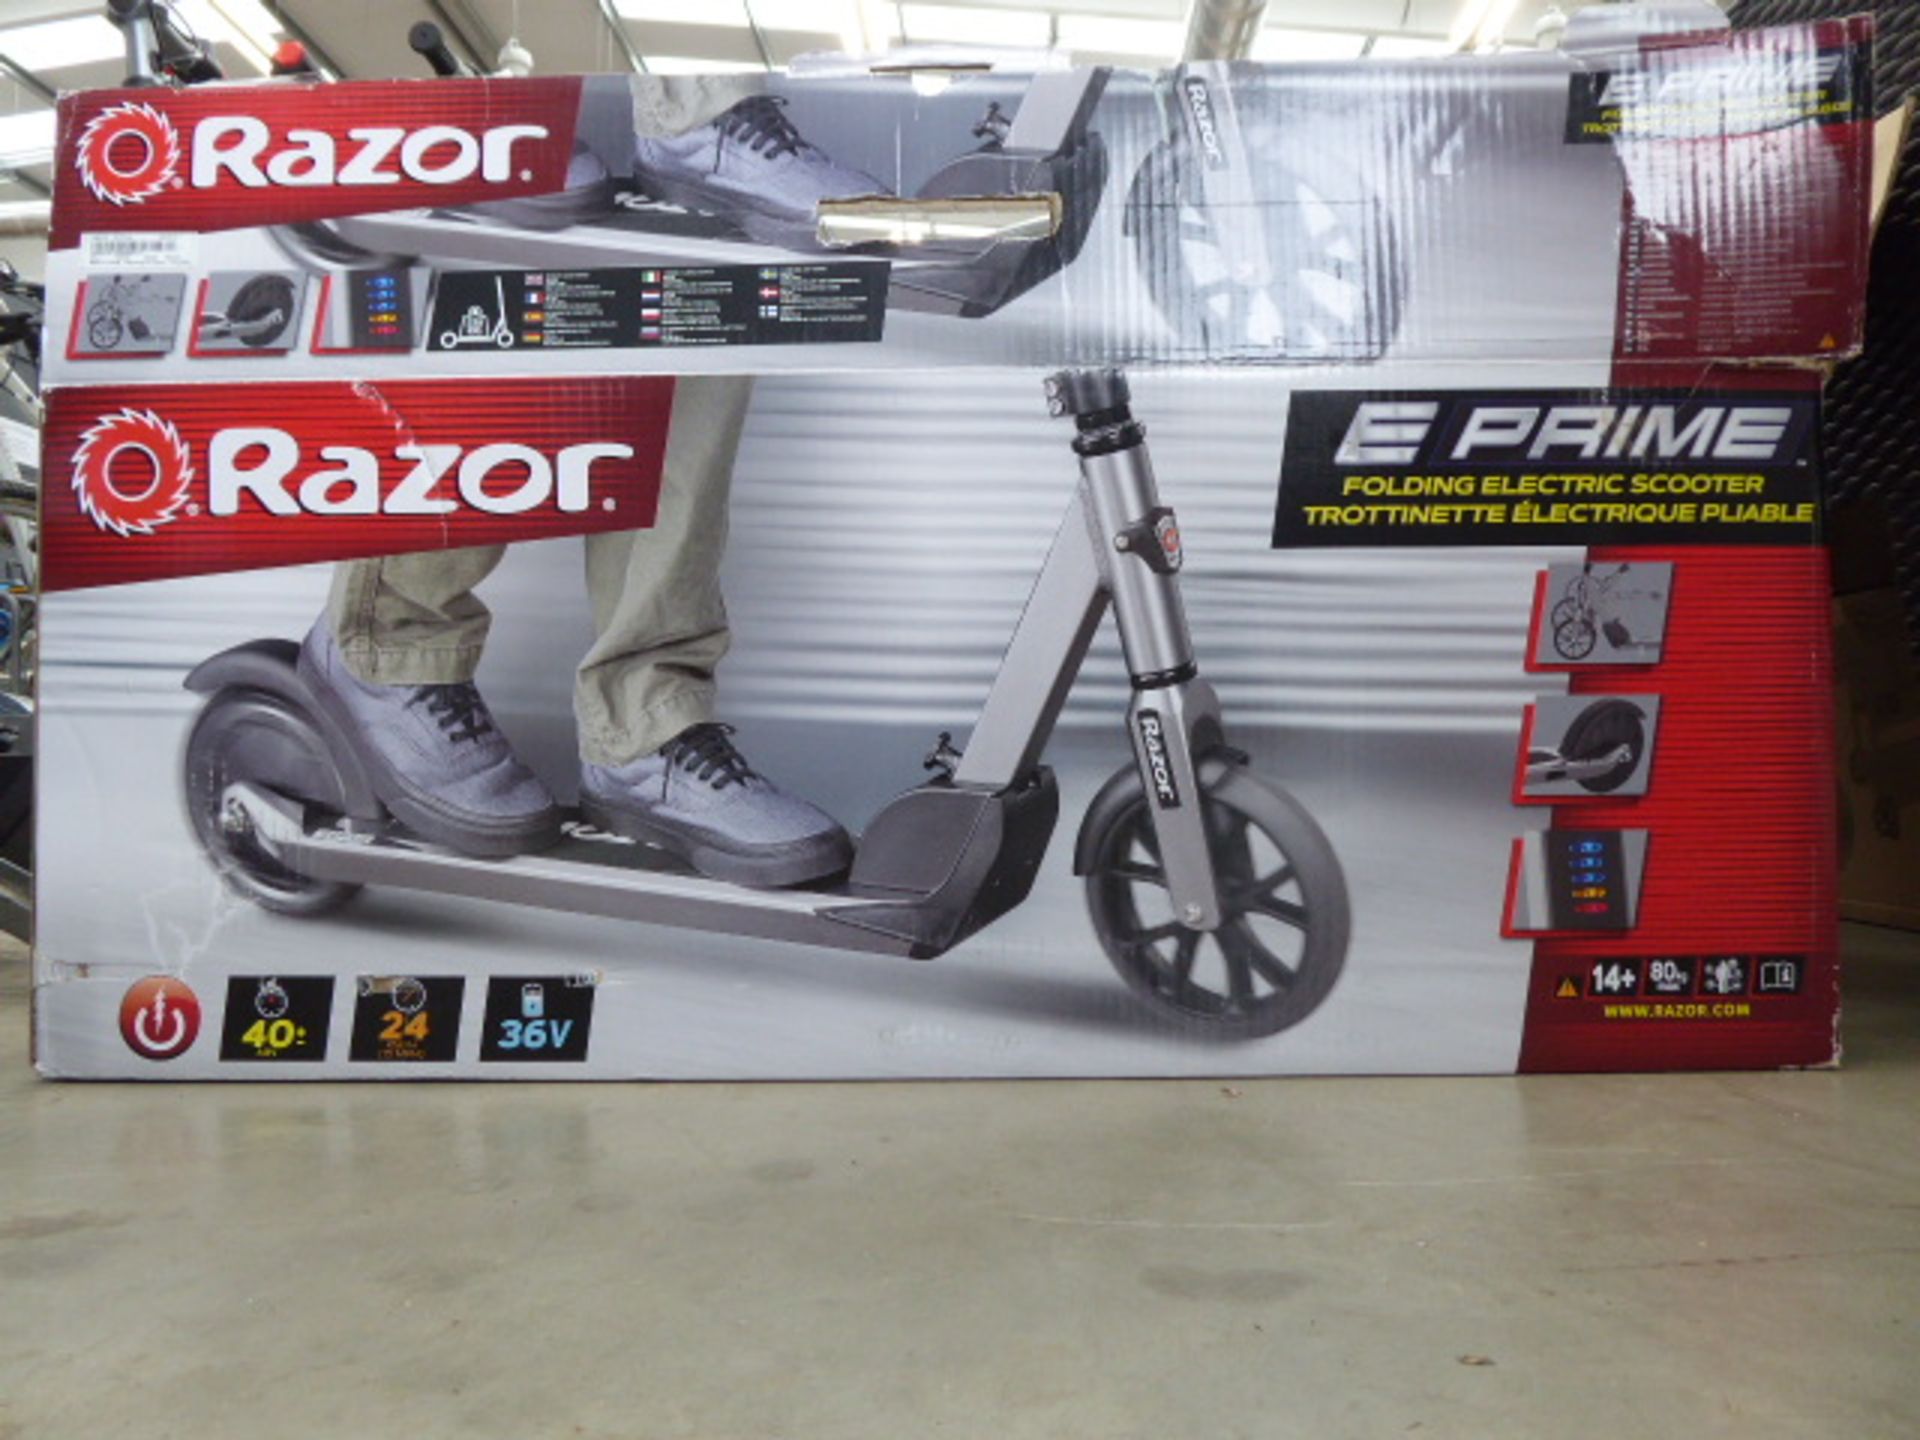 Boxed Razor electric scooter no charger